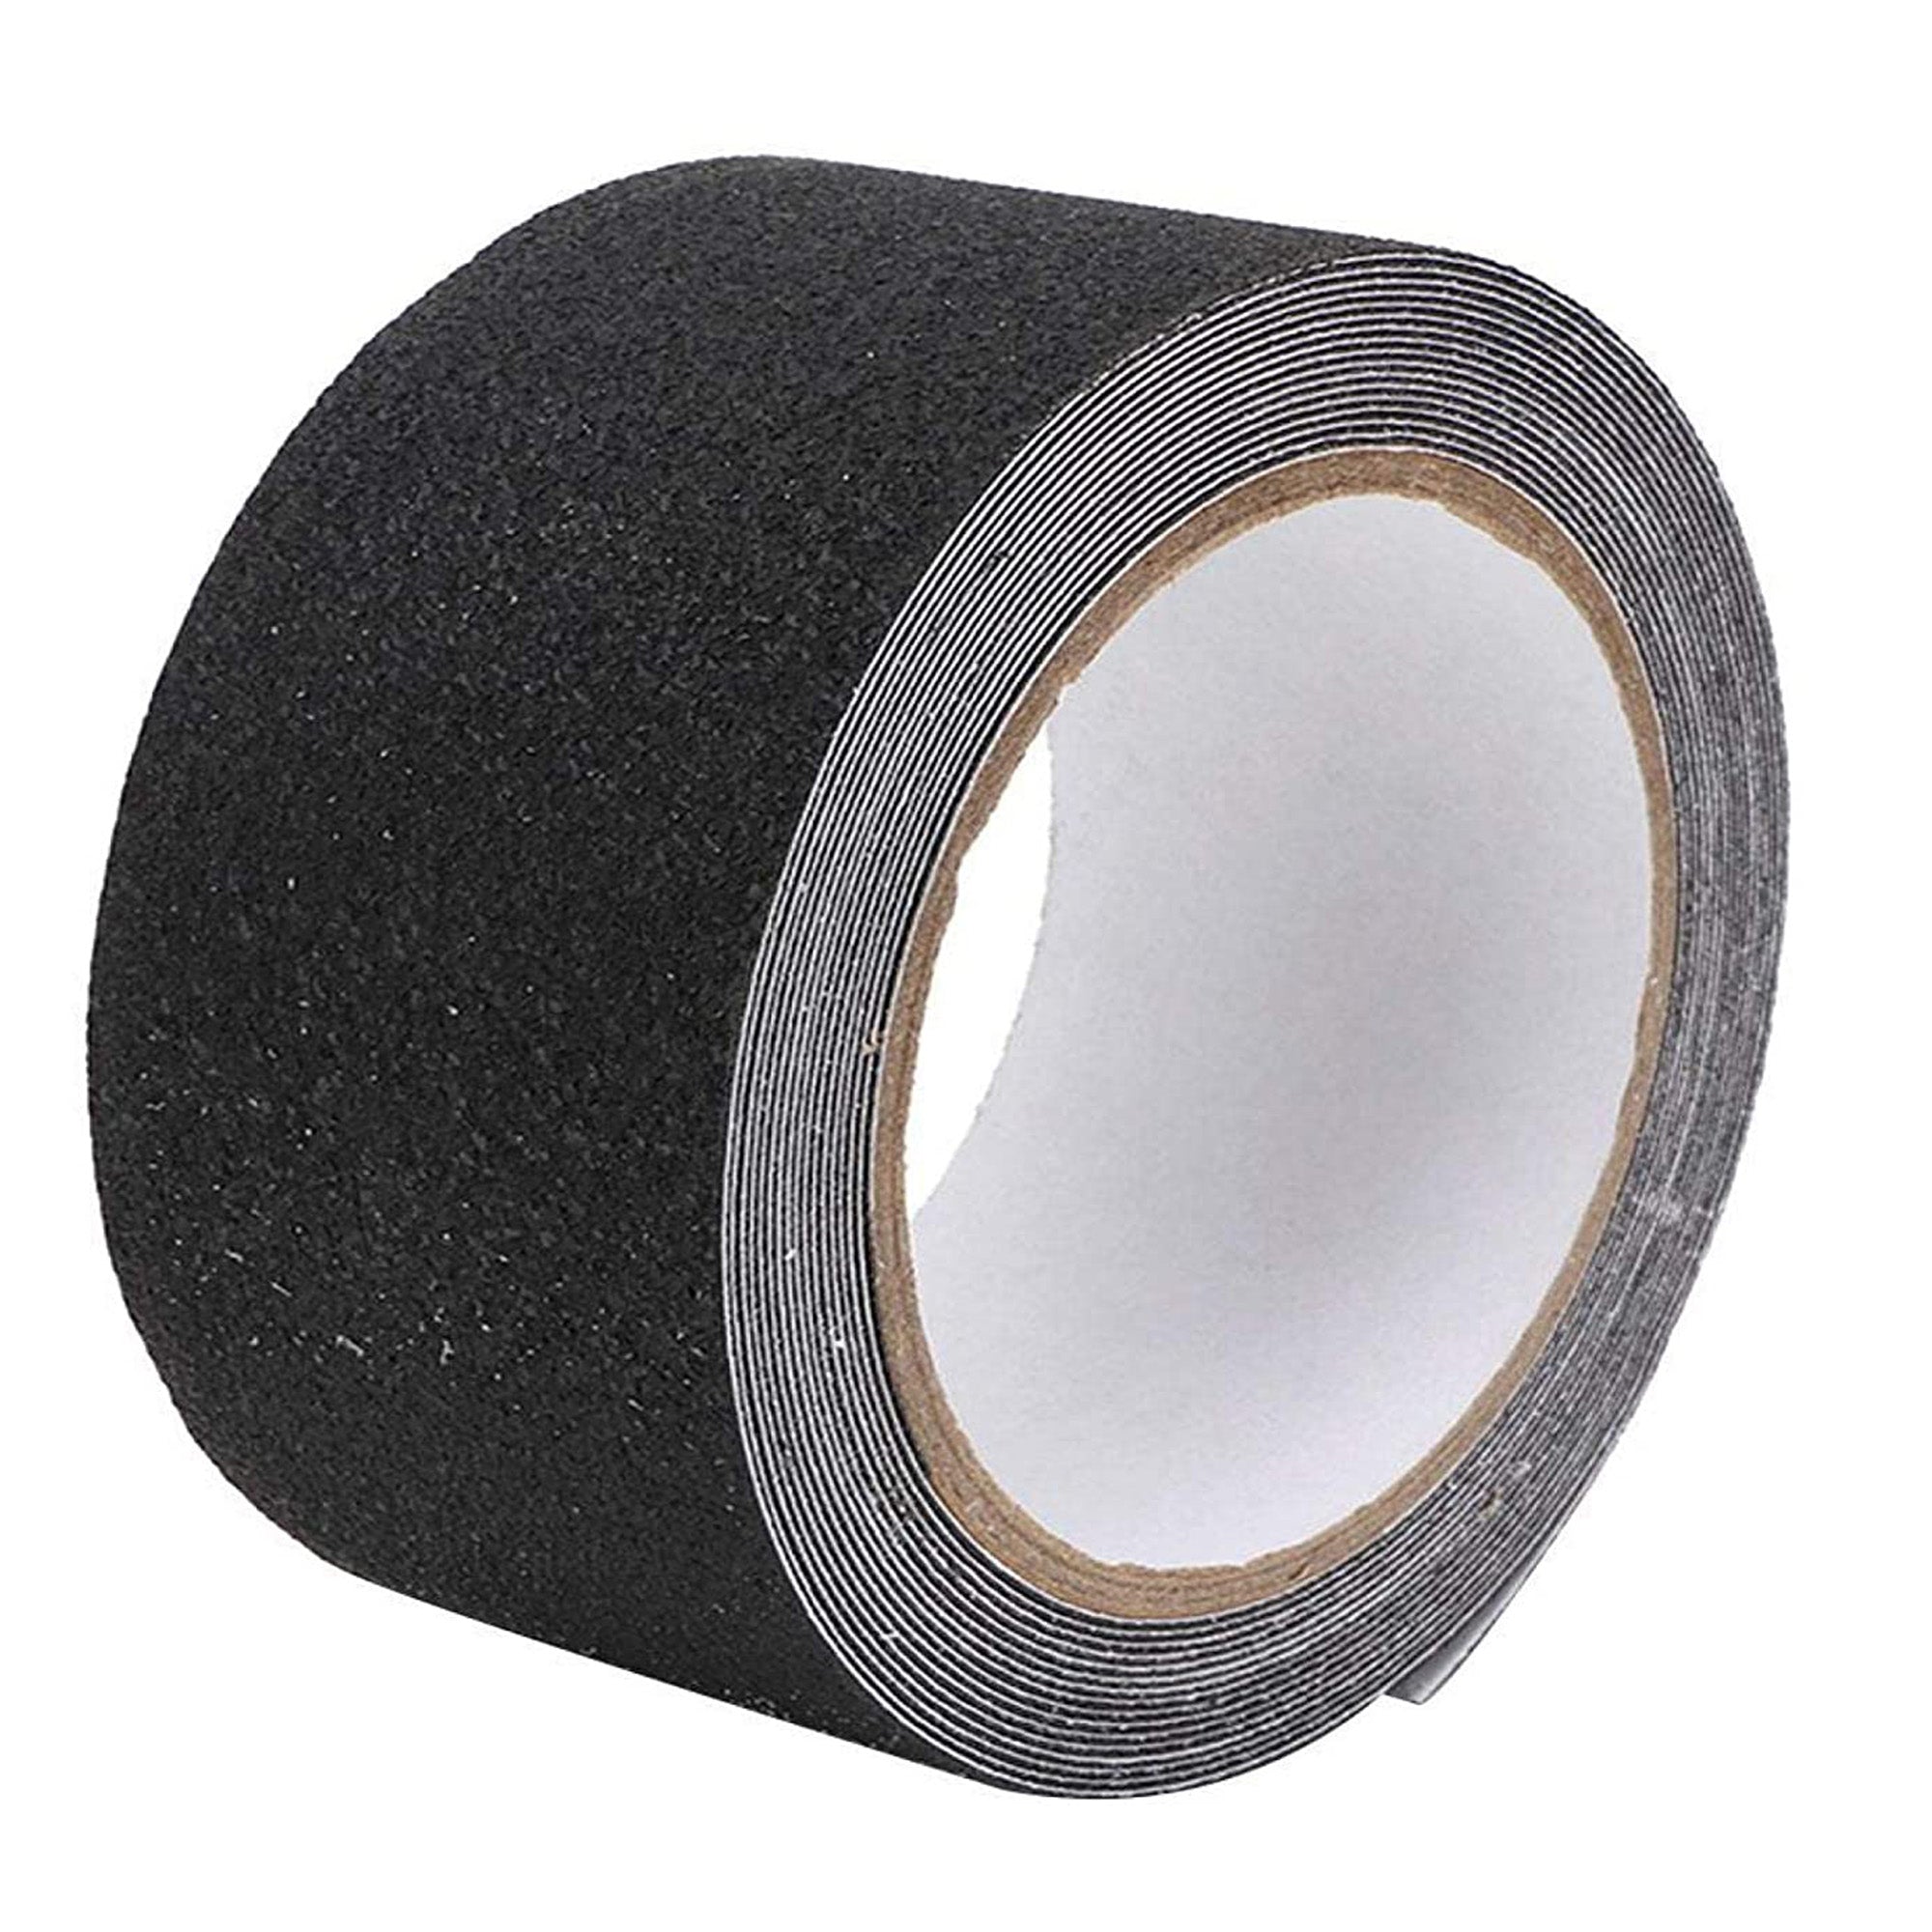 Sussexhome Non-Slip Grip Tape - Waterproof Non-Skid Adhesive Tape for Stairs, Shower Flooring, Bath Tub, Pool Side - 4x35' Roll, Clear